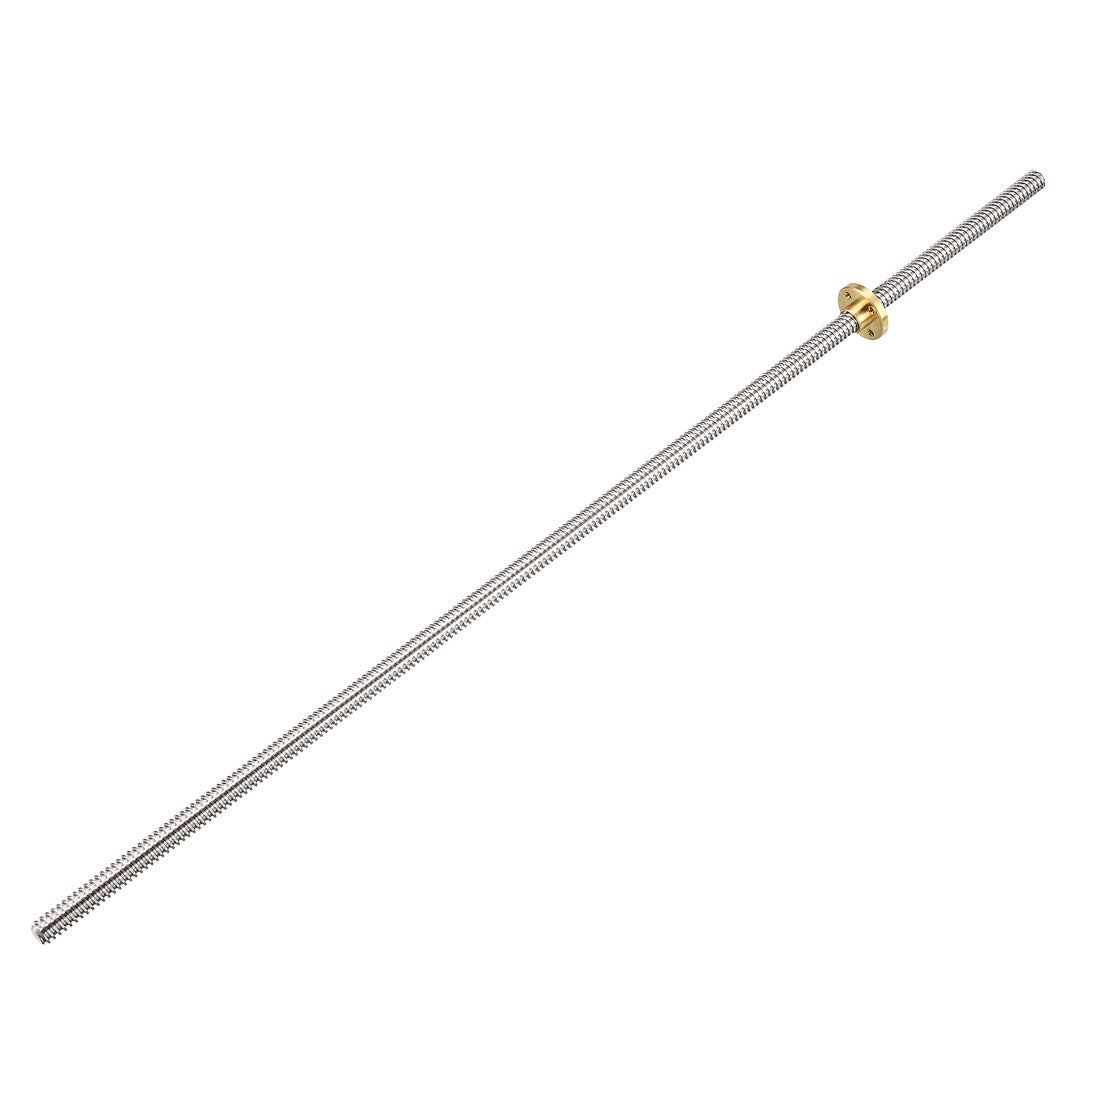 uxcell Uxcell 400mm T8 Pitch 2mm Lead 12mm Lead Screw Rod with Copper Nut for 3D Printer